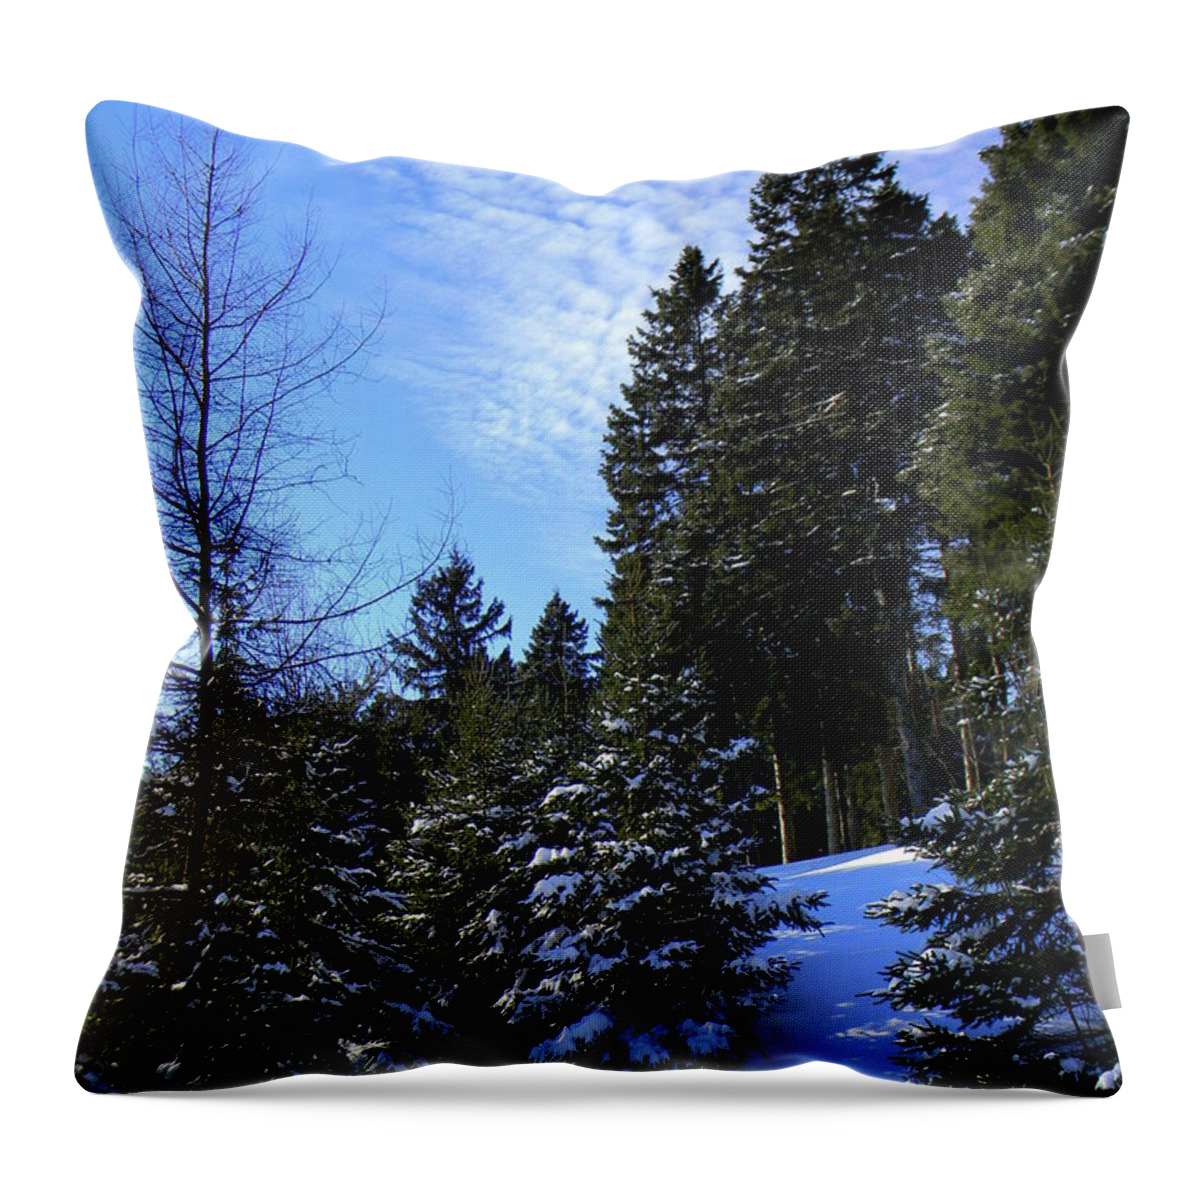 Pine Trees Throw Pillow featuring the photograph Optimistic by Elfriede Fulda